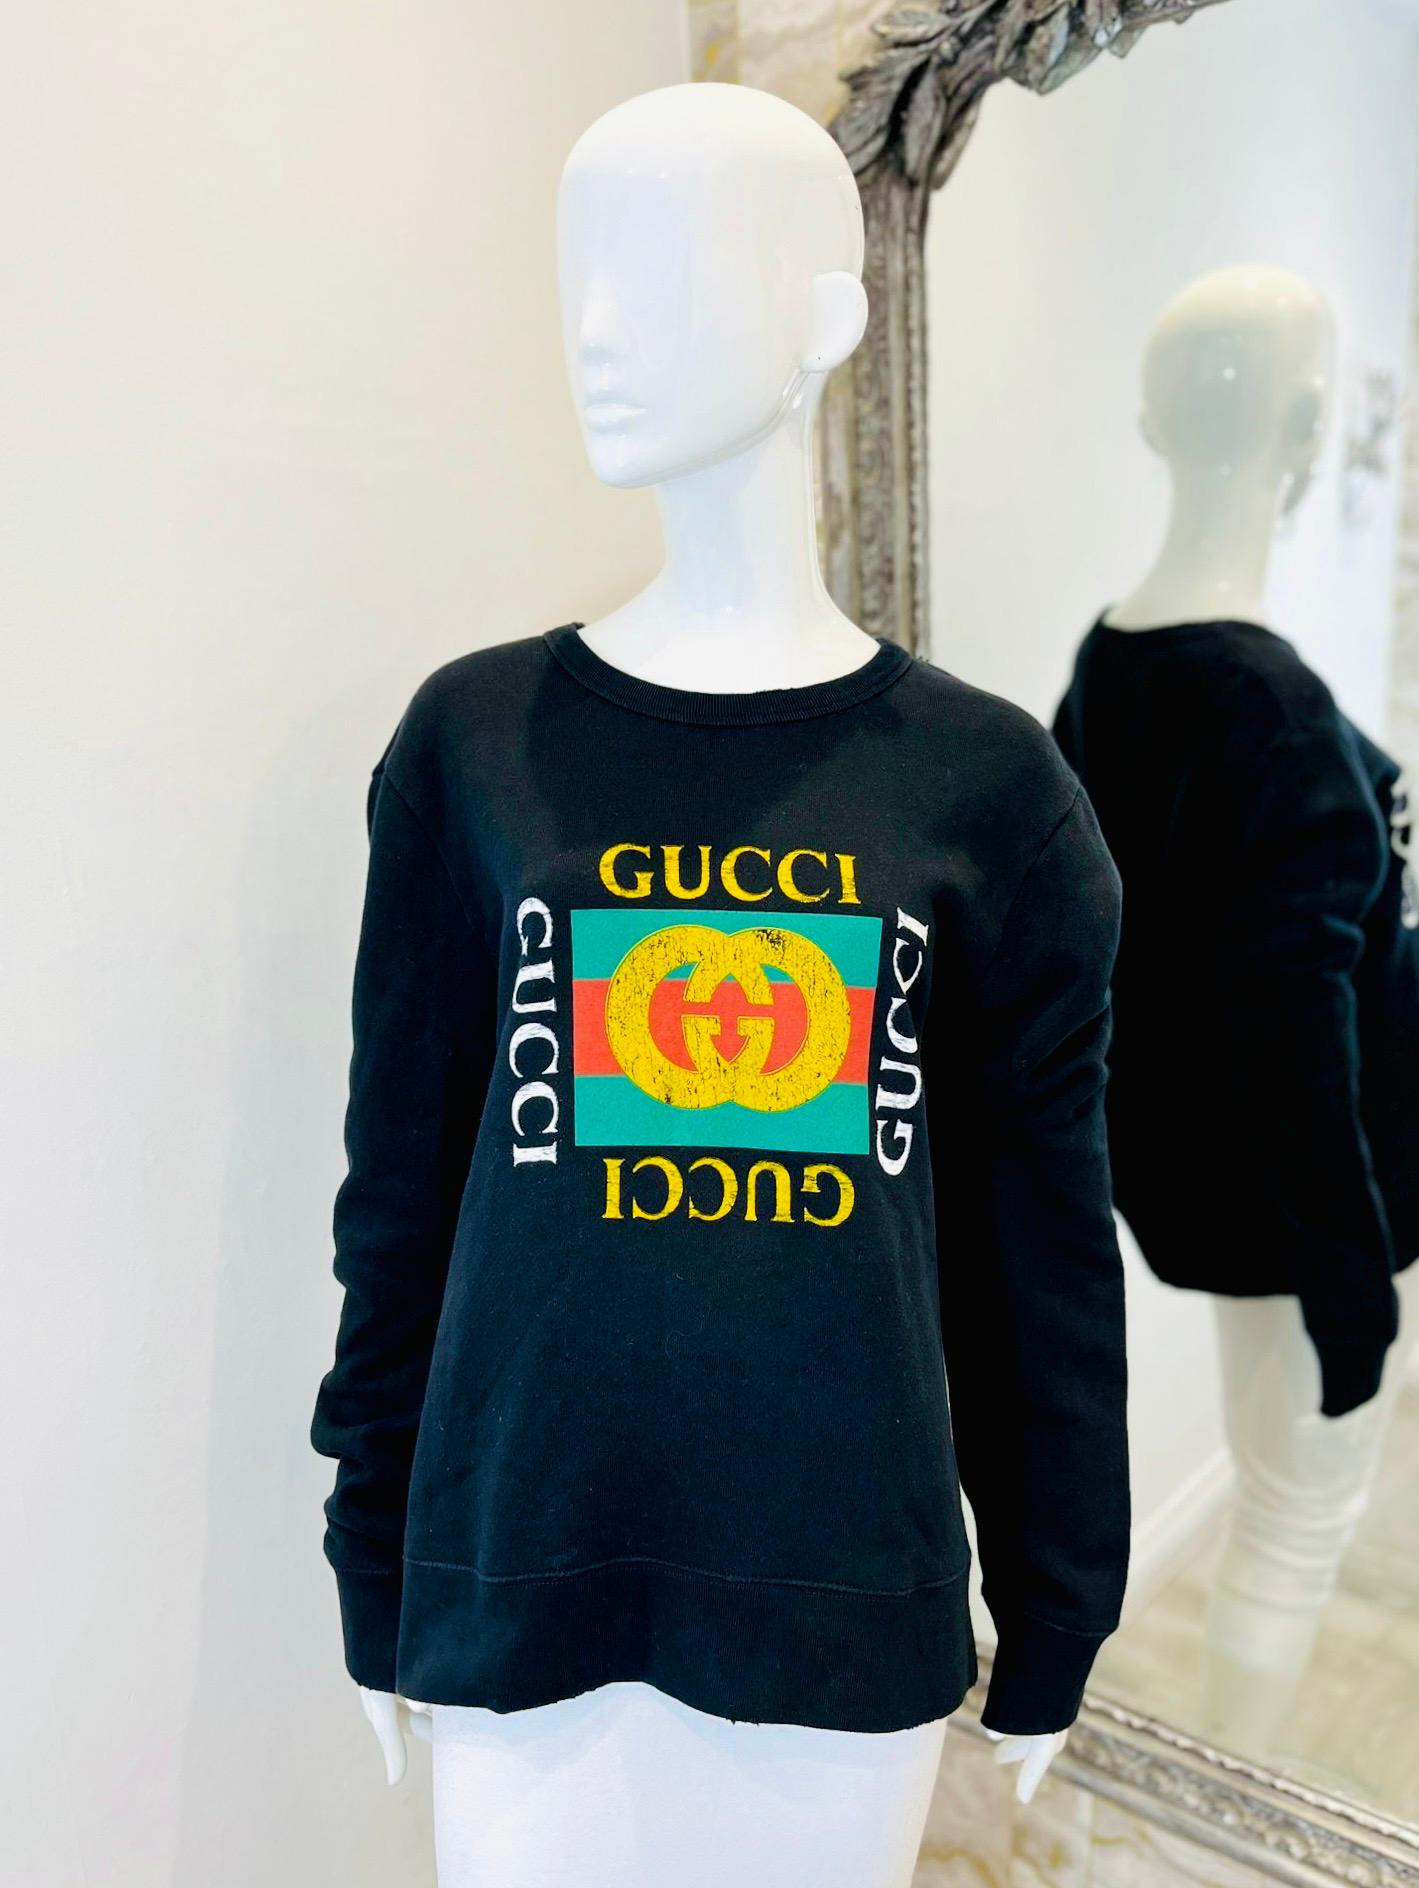 Gucci Logo Cotton Sweatshirt

Black long sleeved top designed with archival Gucci logo from the '80s.

Featuring distressed trims effect, crew neckline and ribbed cuffs and hem. Rrp £770

Size – L

Condition – Very Good

Composition – 100% Cotton